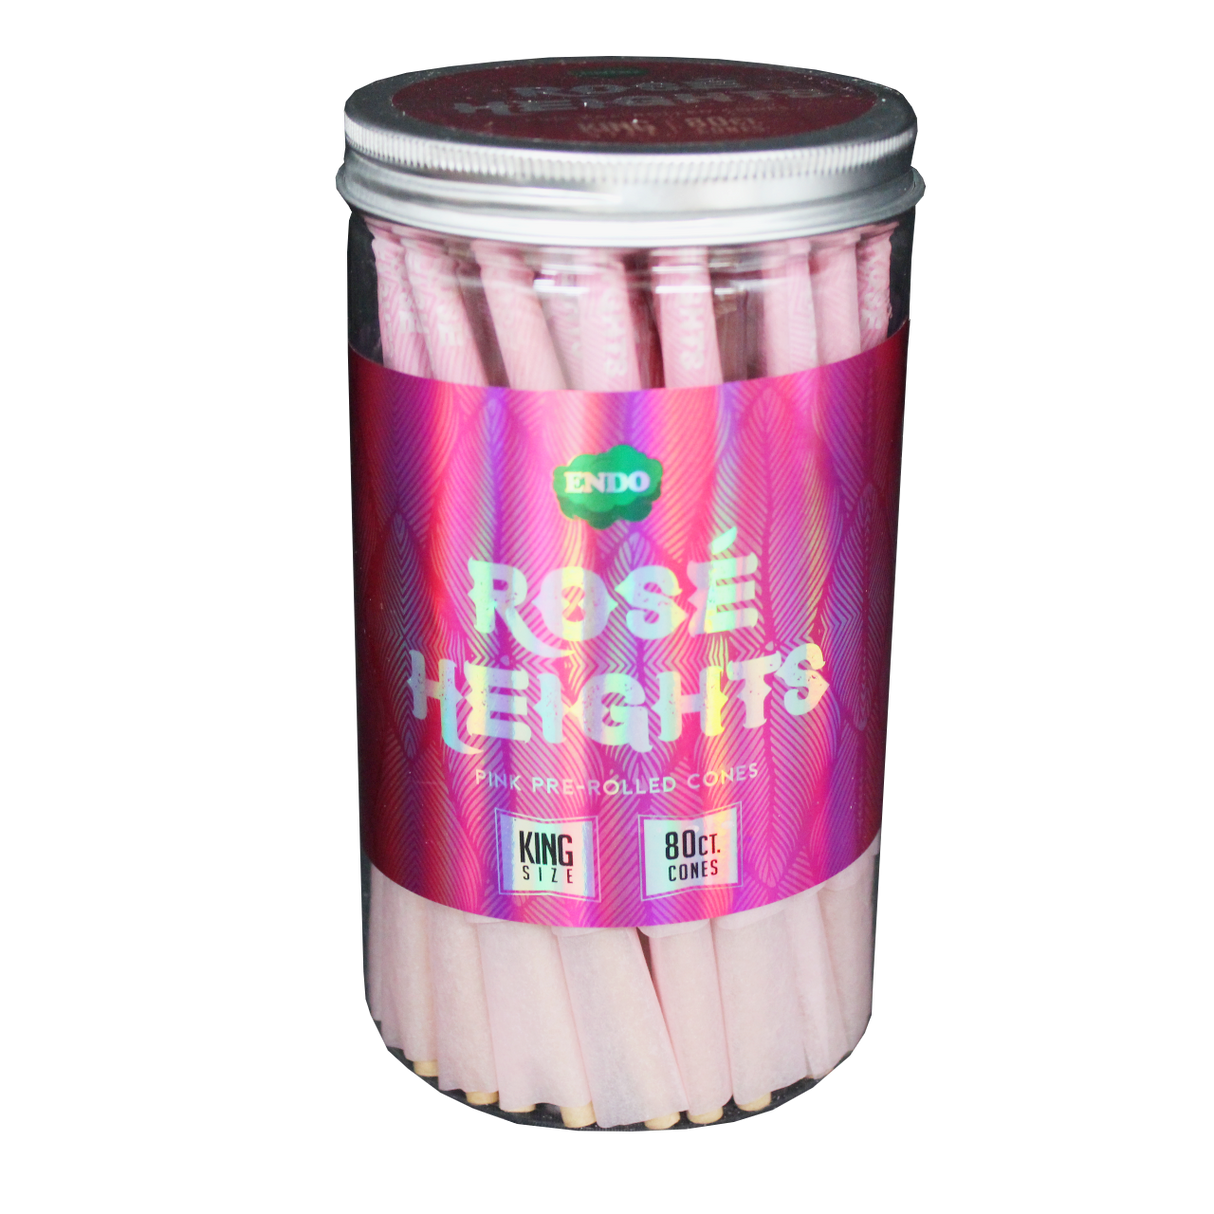 Endo Rose Heights Pink Cones